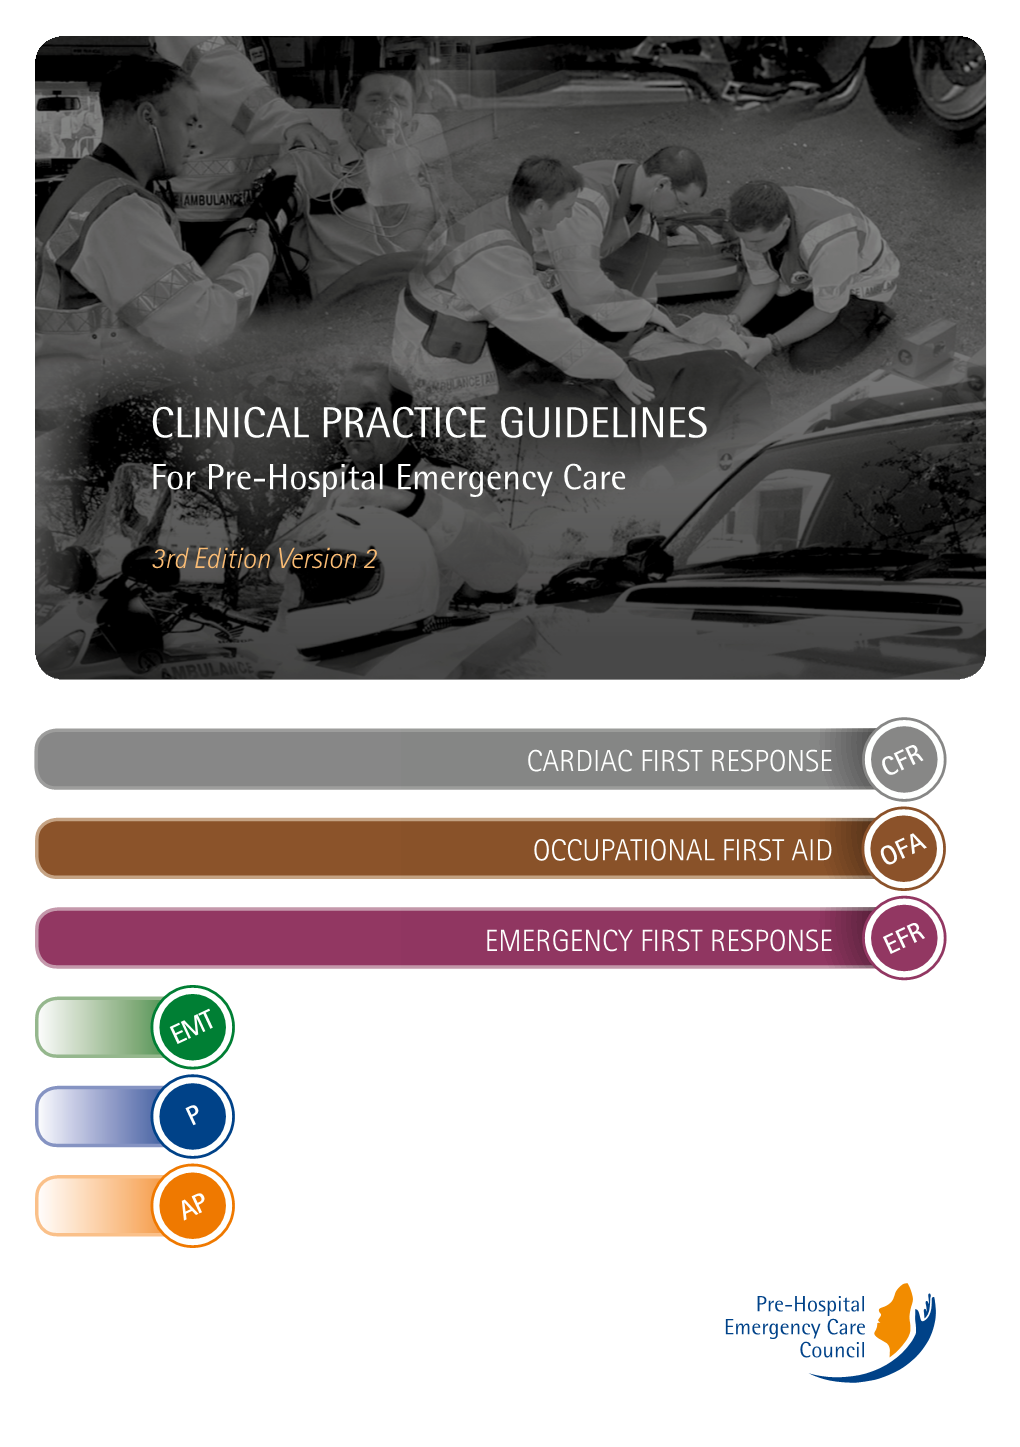 CLINICAL PRACTICE GUIDELINES for Pre-Hospital Emergency Care